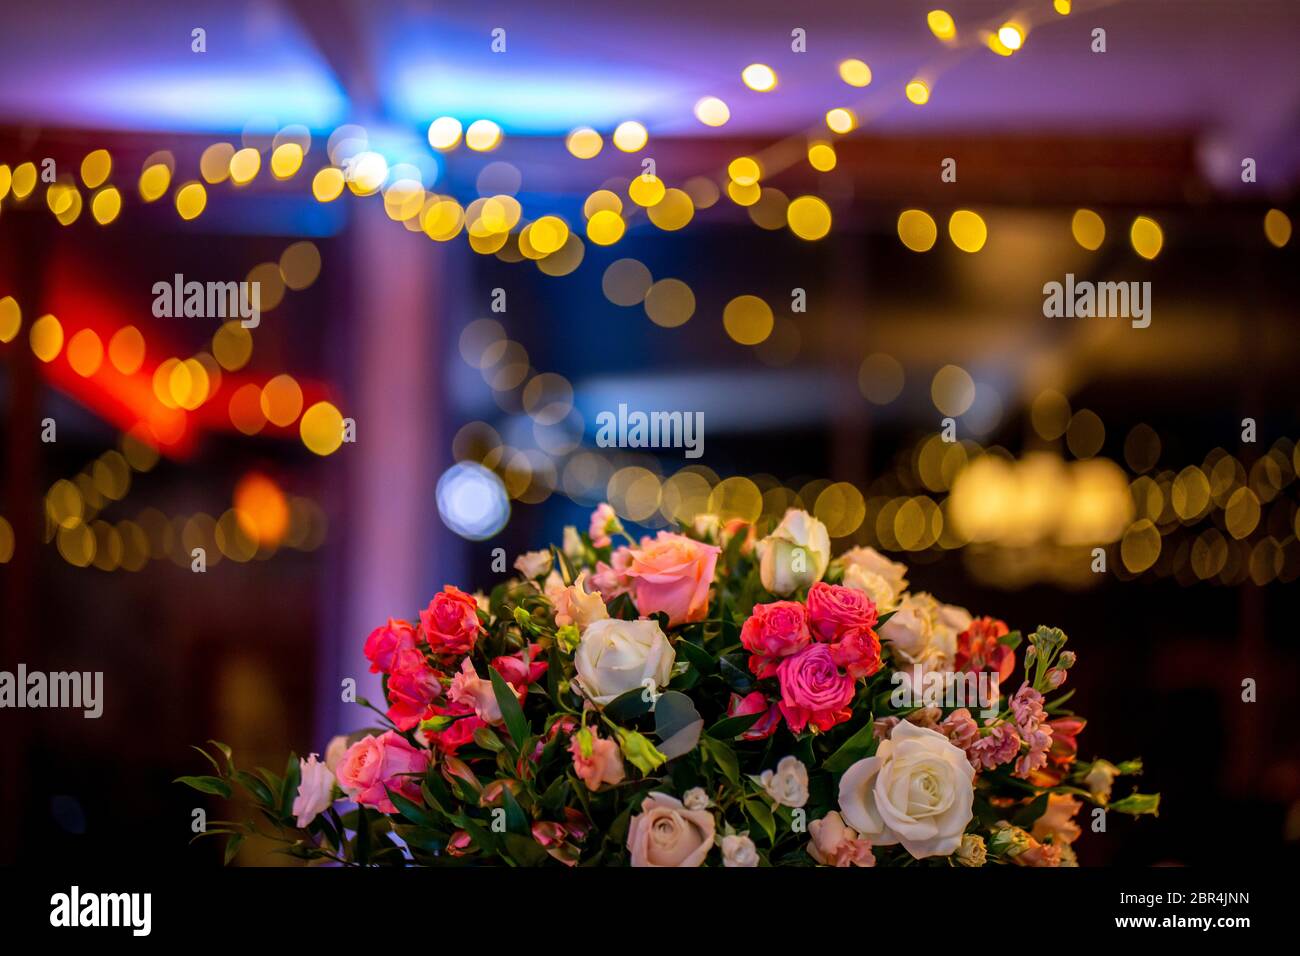 Bouquet of flowers on background of colorful bokeh light. Closeup of wedding flowers bouquet and blurred colorful lights in Stock Photo - Alamy